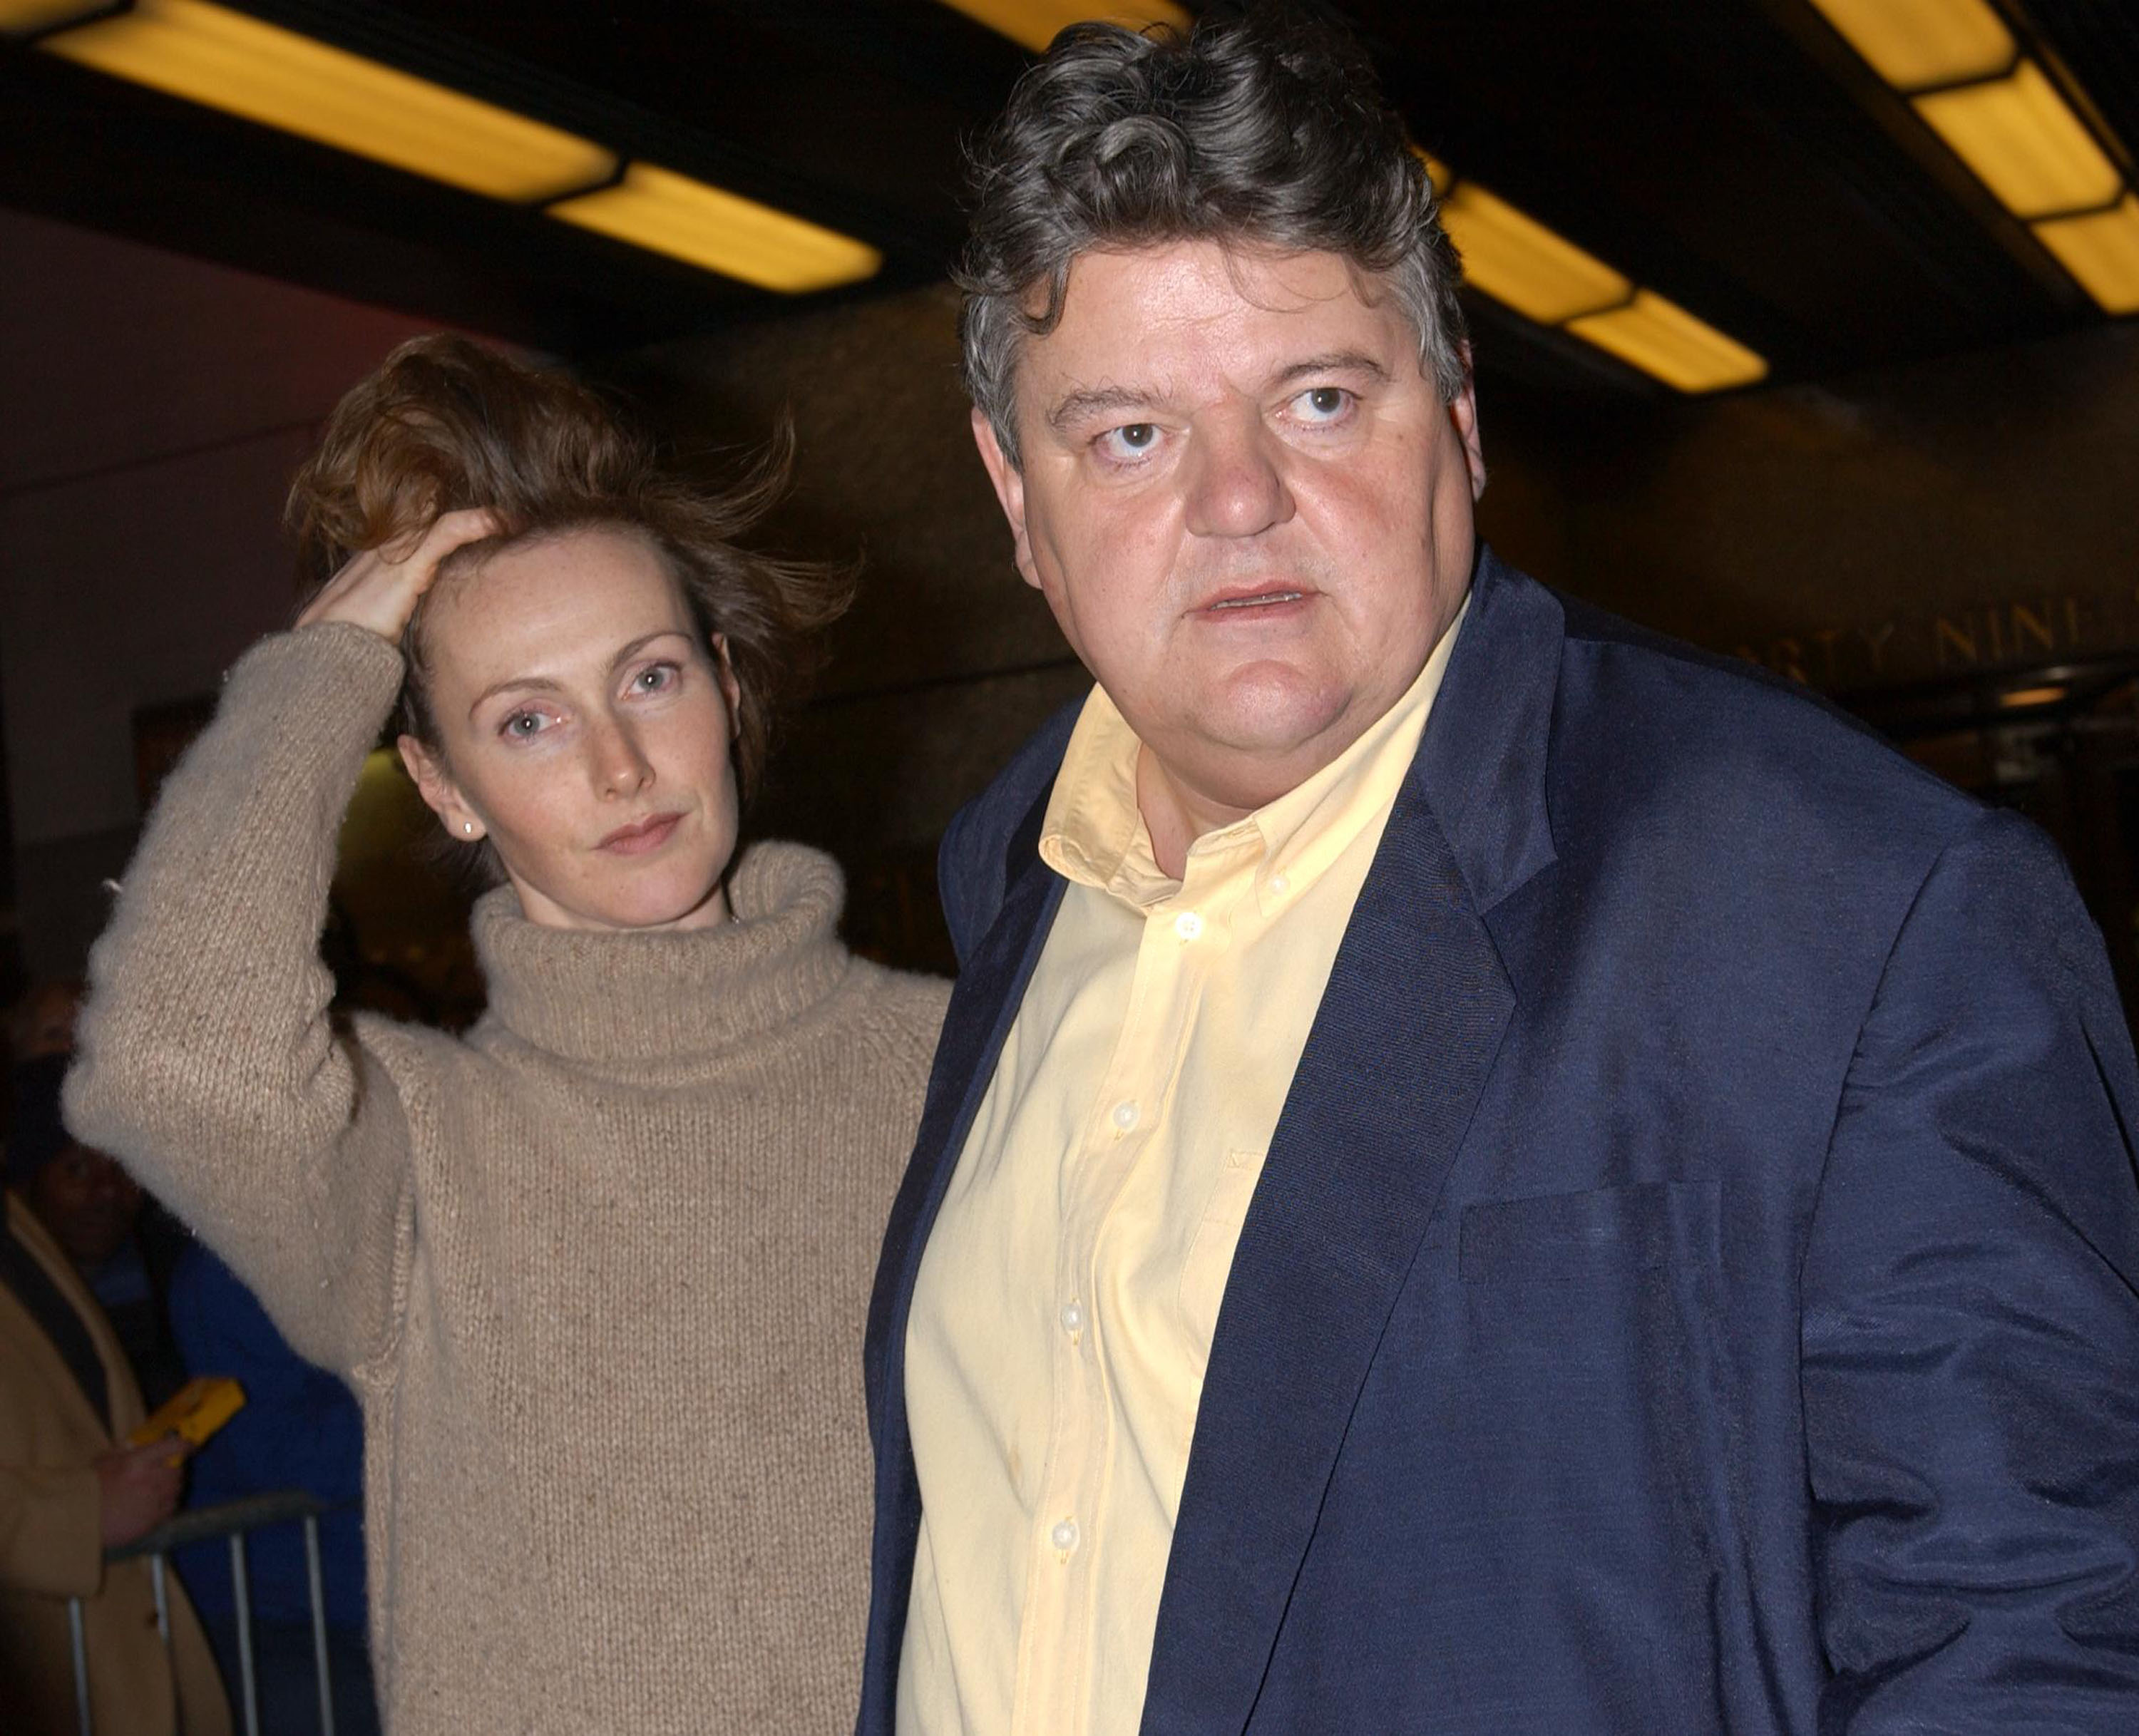 Robbie Coltrane and Rhona Gemmell are pictured as they arrive for the New York Premiere of the film 'Harry Potter and the Sorcerer's Stone' November 11, 2001, at Ziegfeld Theater in New York City | Source: Getty Images